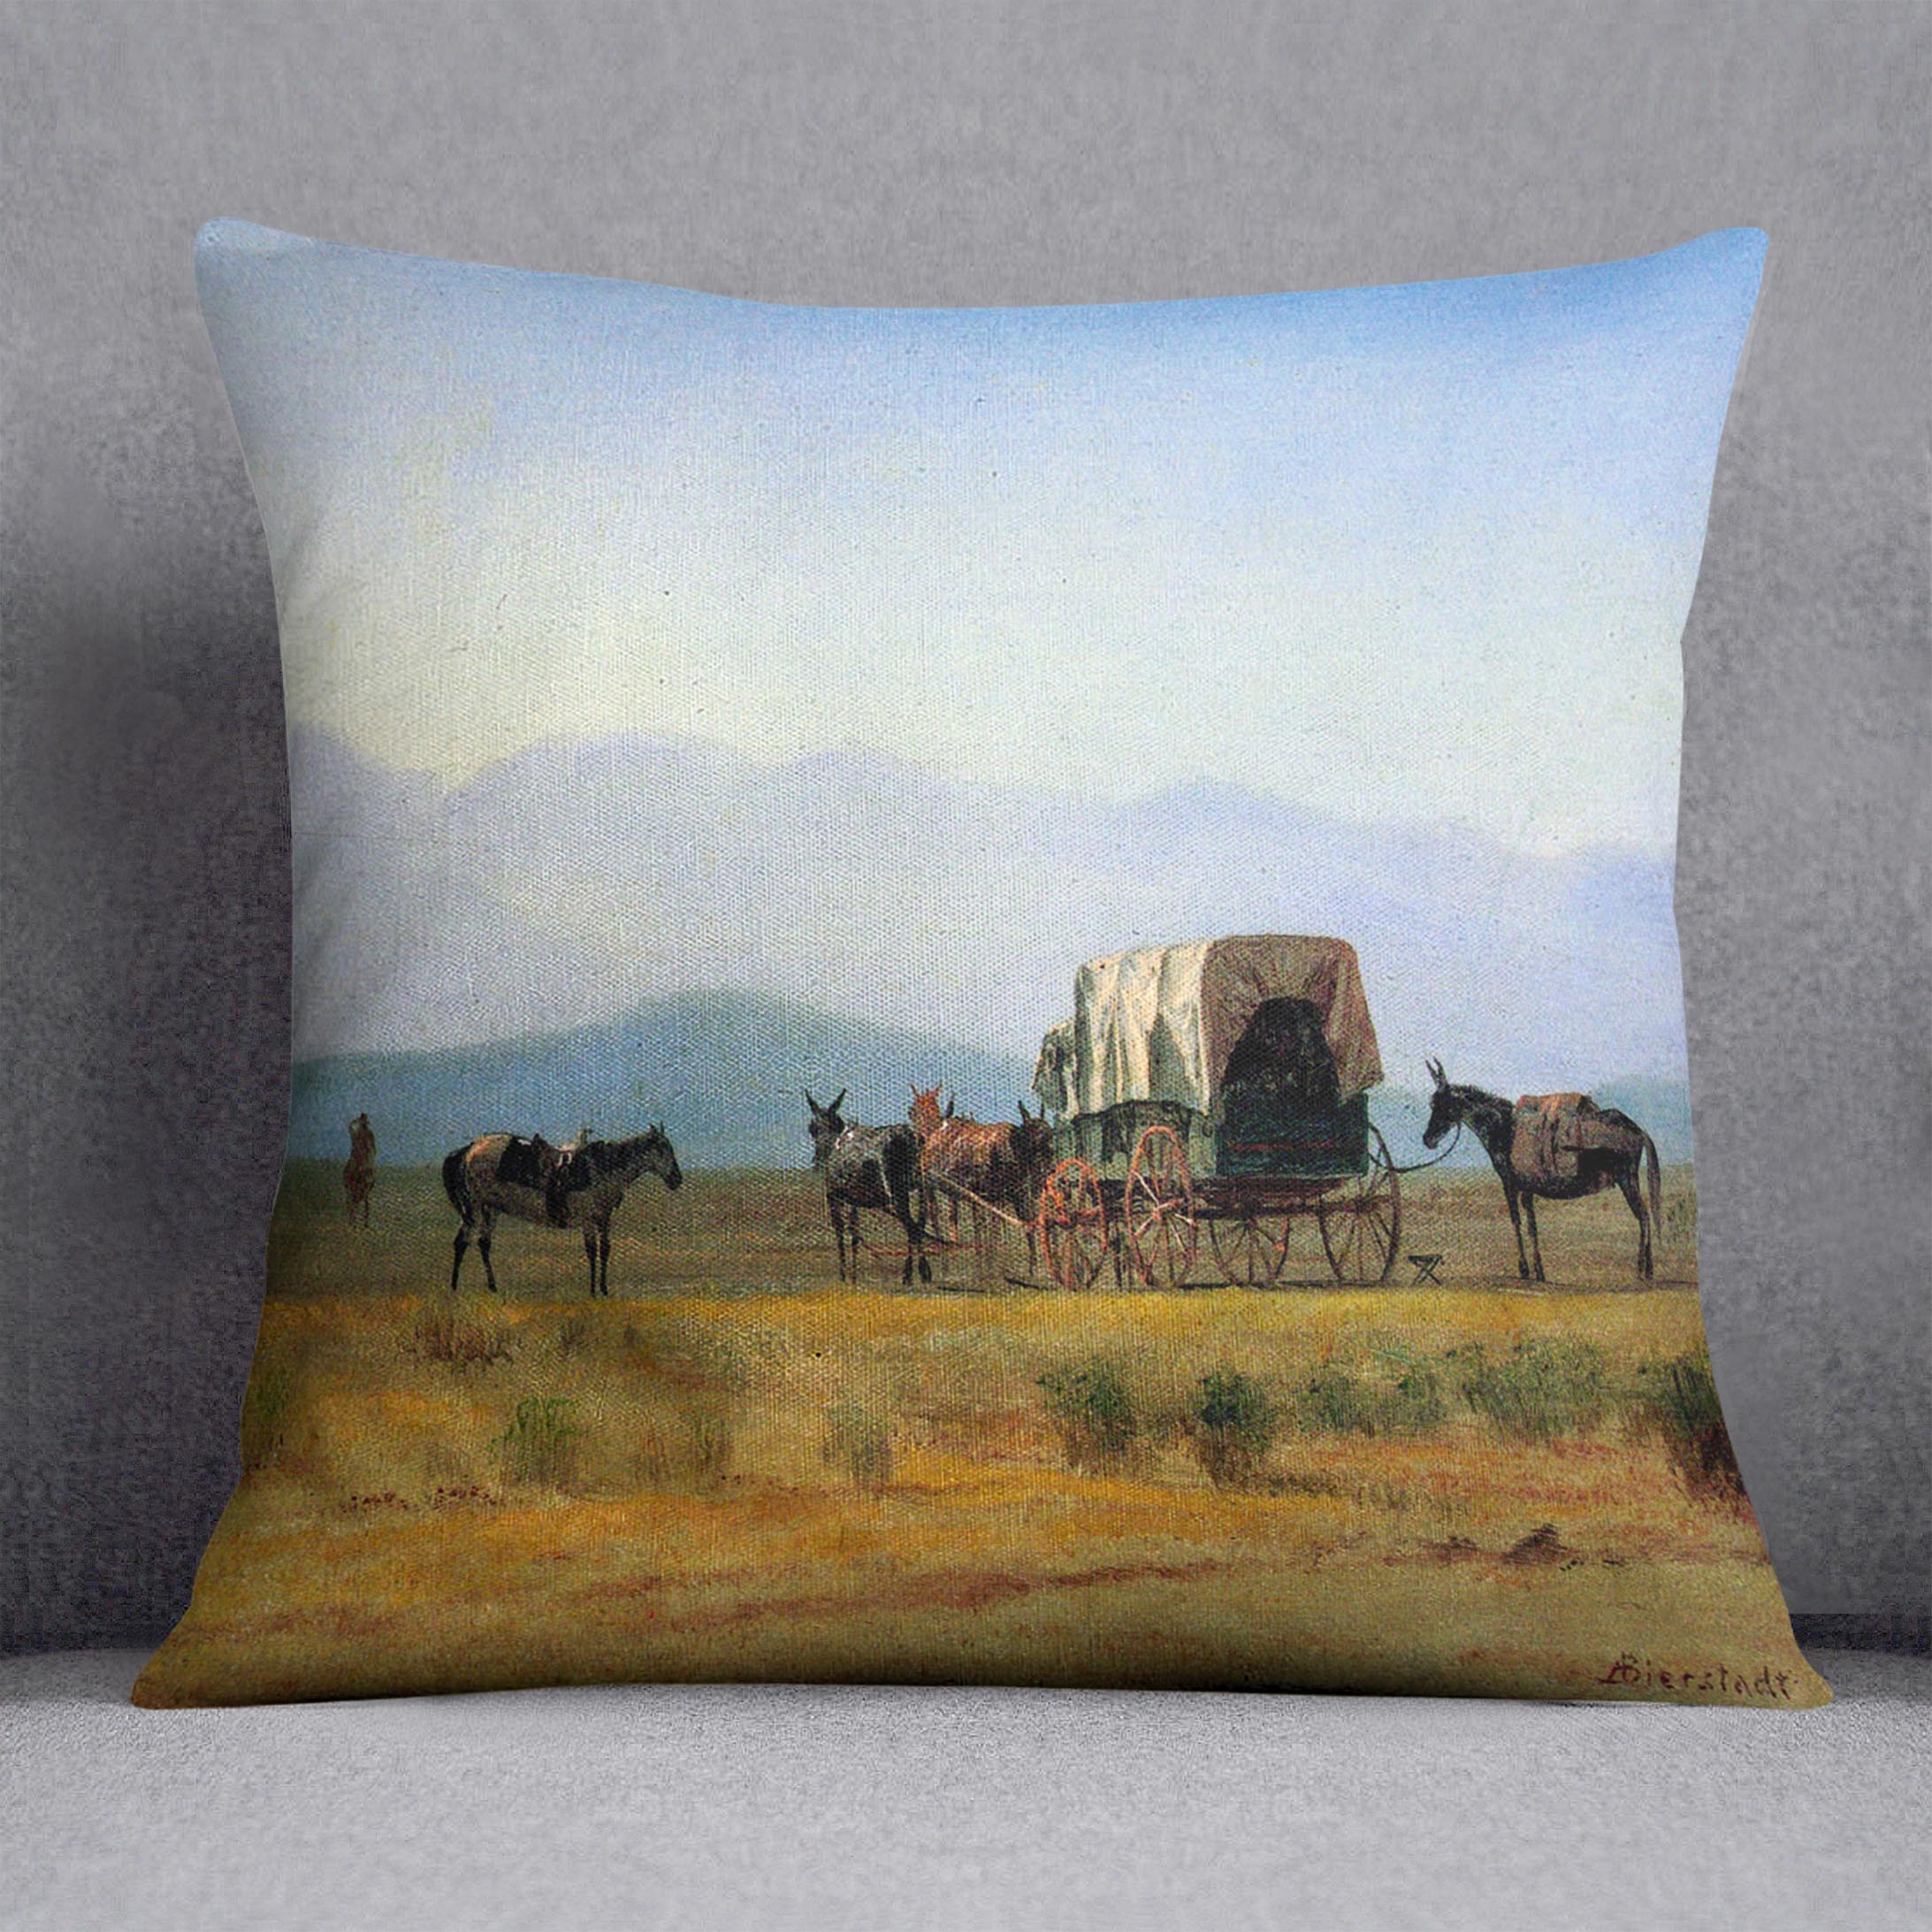 The stagecoach in the Rockies by Bierstadt Cushion - Canvas Art Rocks - 1